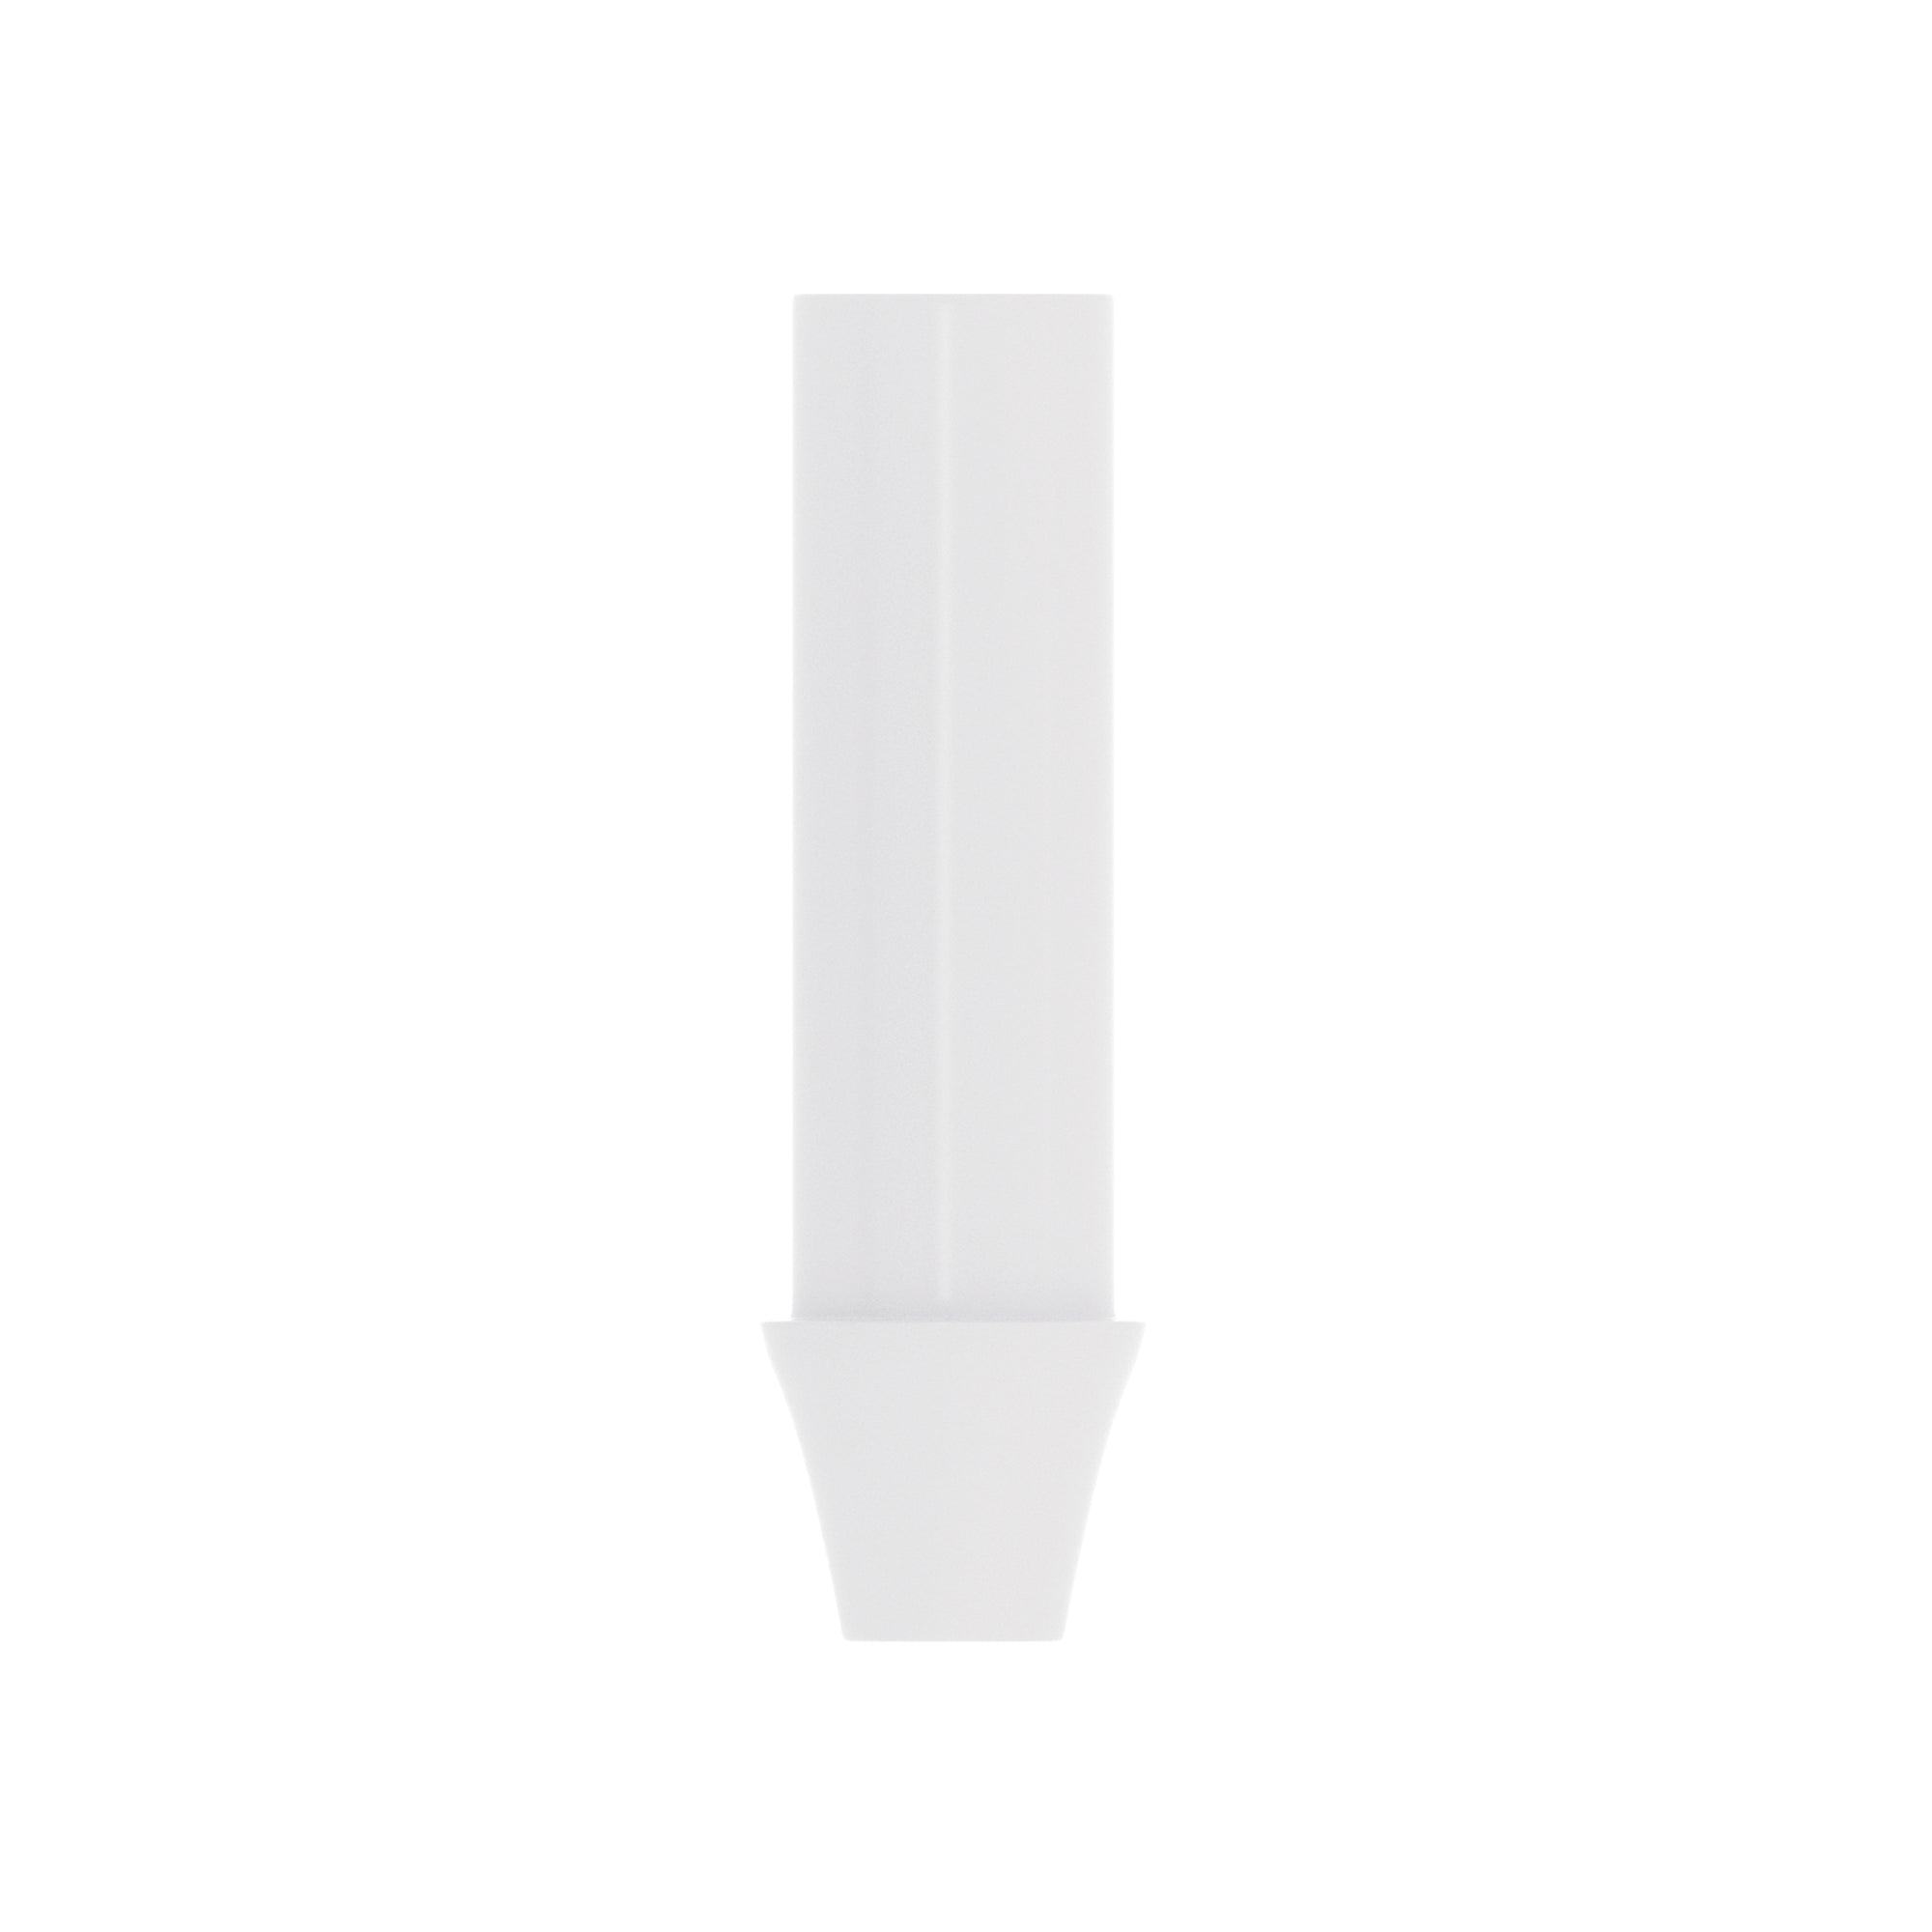 DSI Straight Plastic Castable Abutment Rotational  4.5mm -Conical Connection RP Ø4.3mm-5.0mm